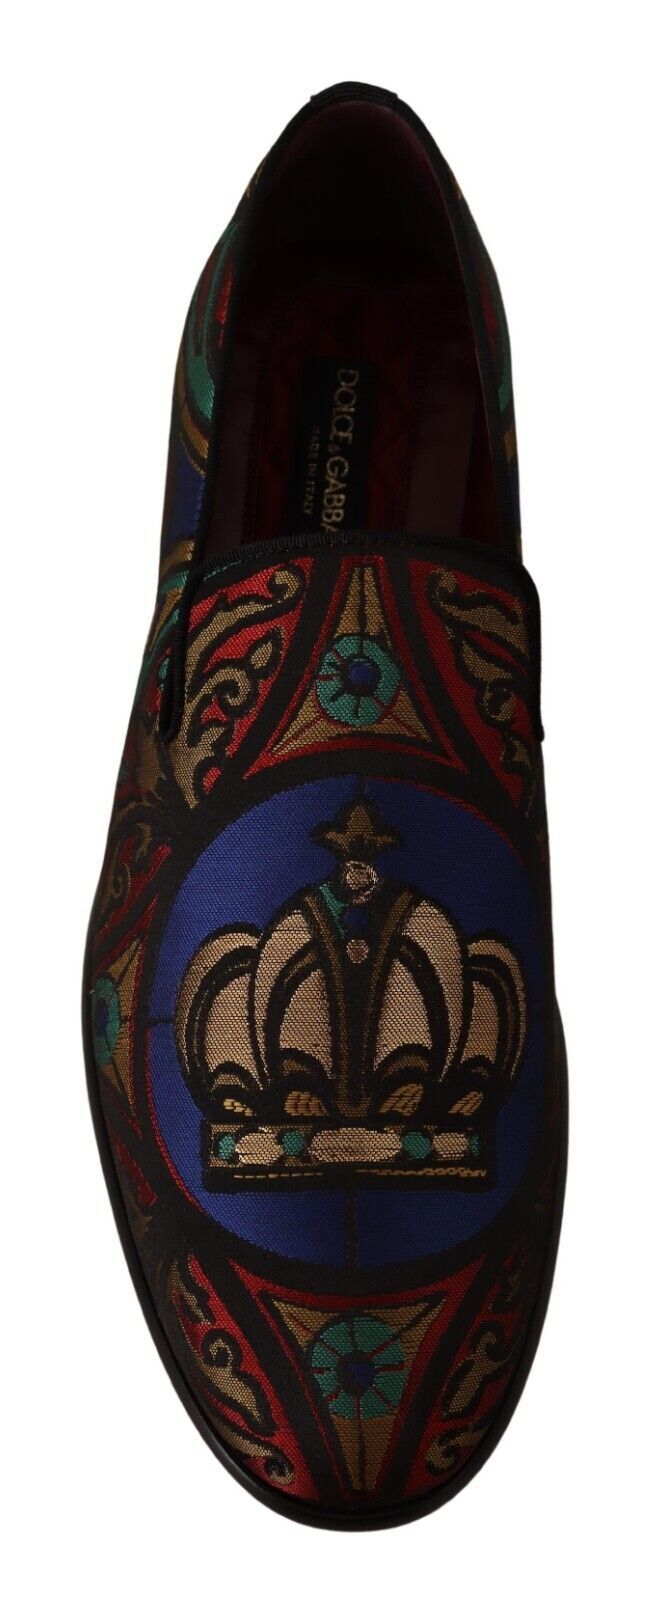 Dolce & Gabbana Multicolor Jacquard Crown Slippers Loafers Shoes